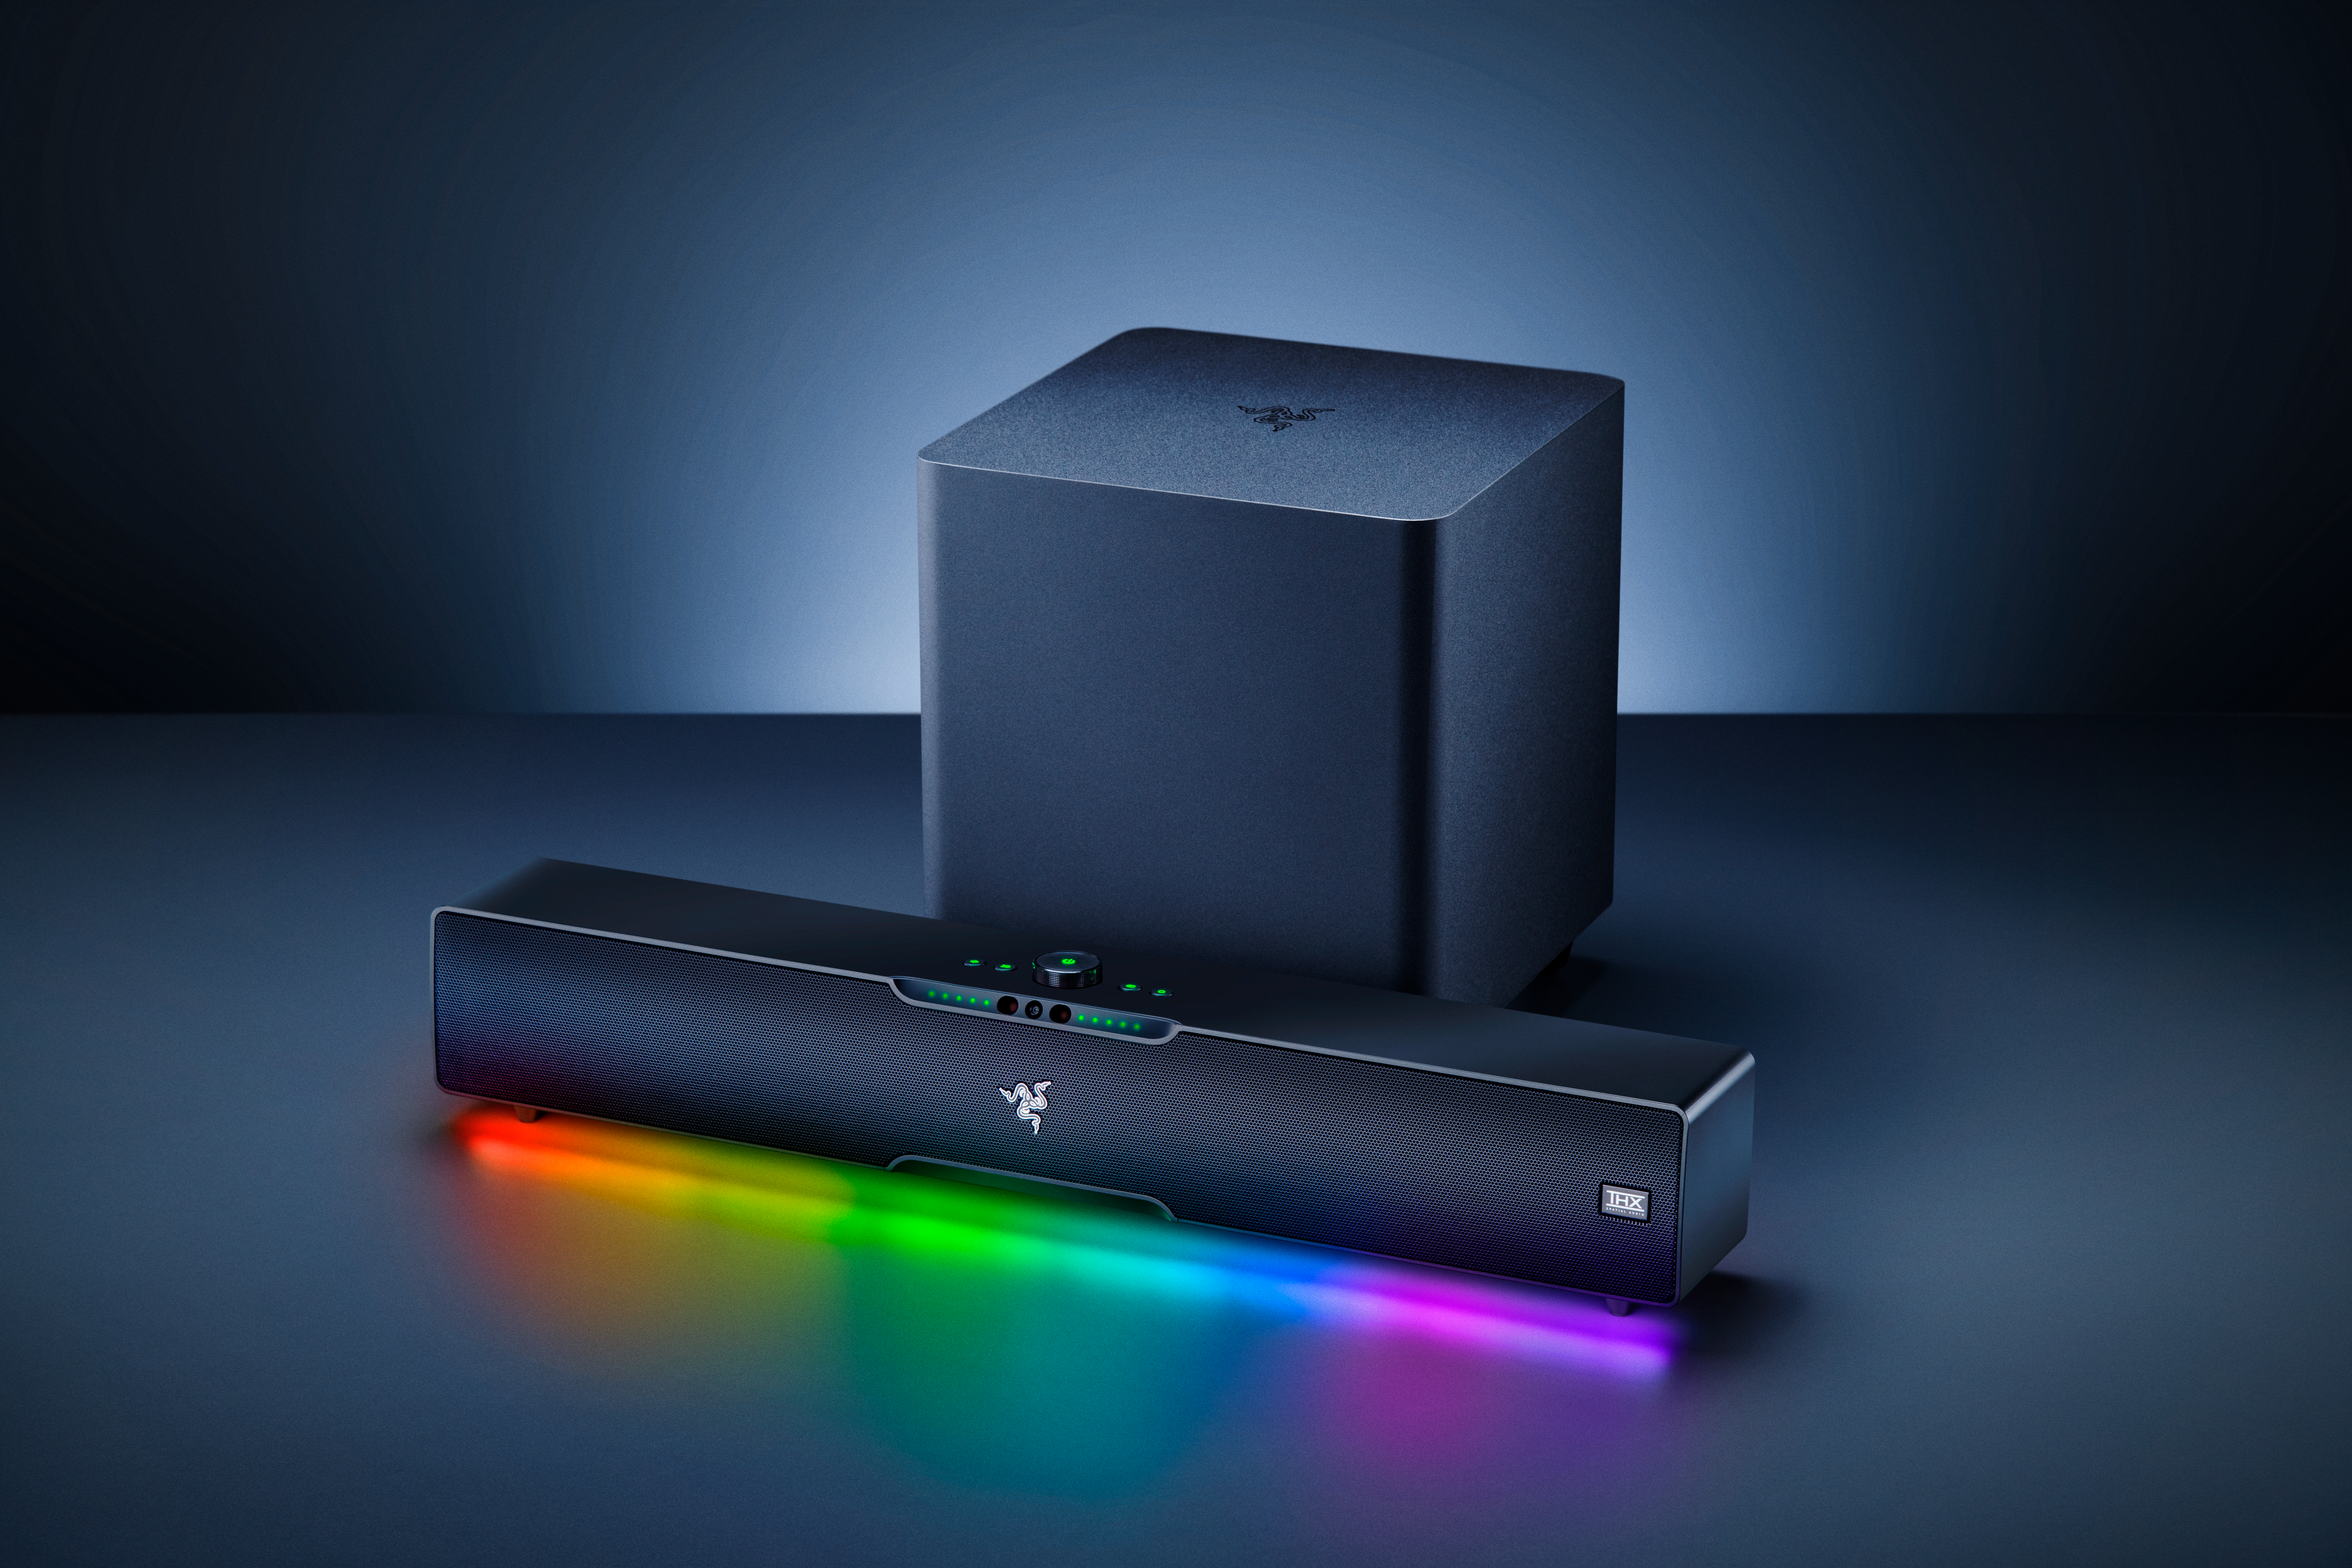 A Razer Leviathan V2 Pro soundbar with a subwoofer behind it. The soundbar is project multi-colored RGB lights from the front of its base.